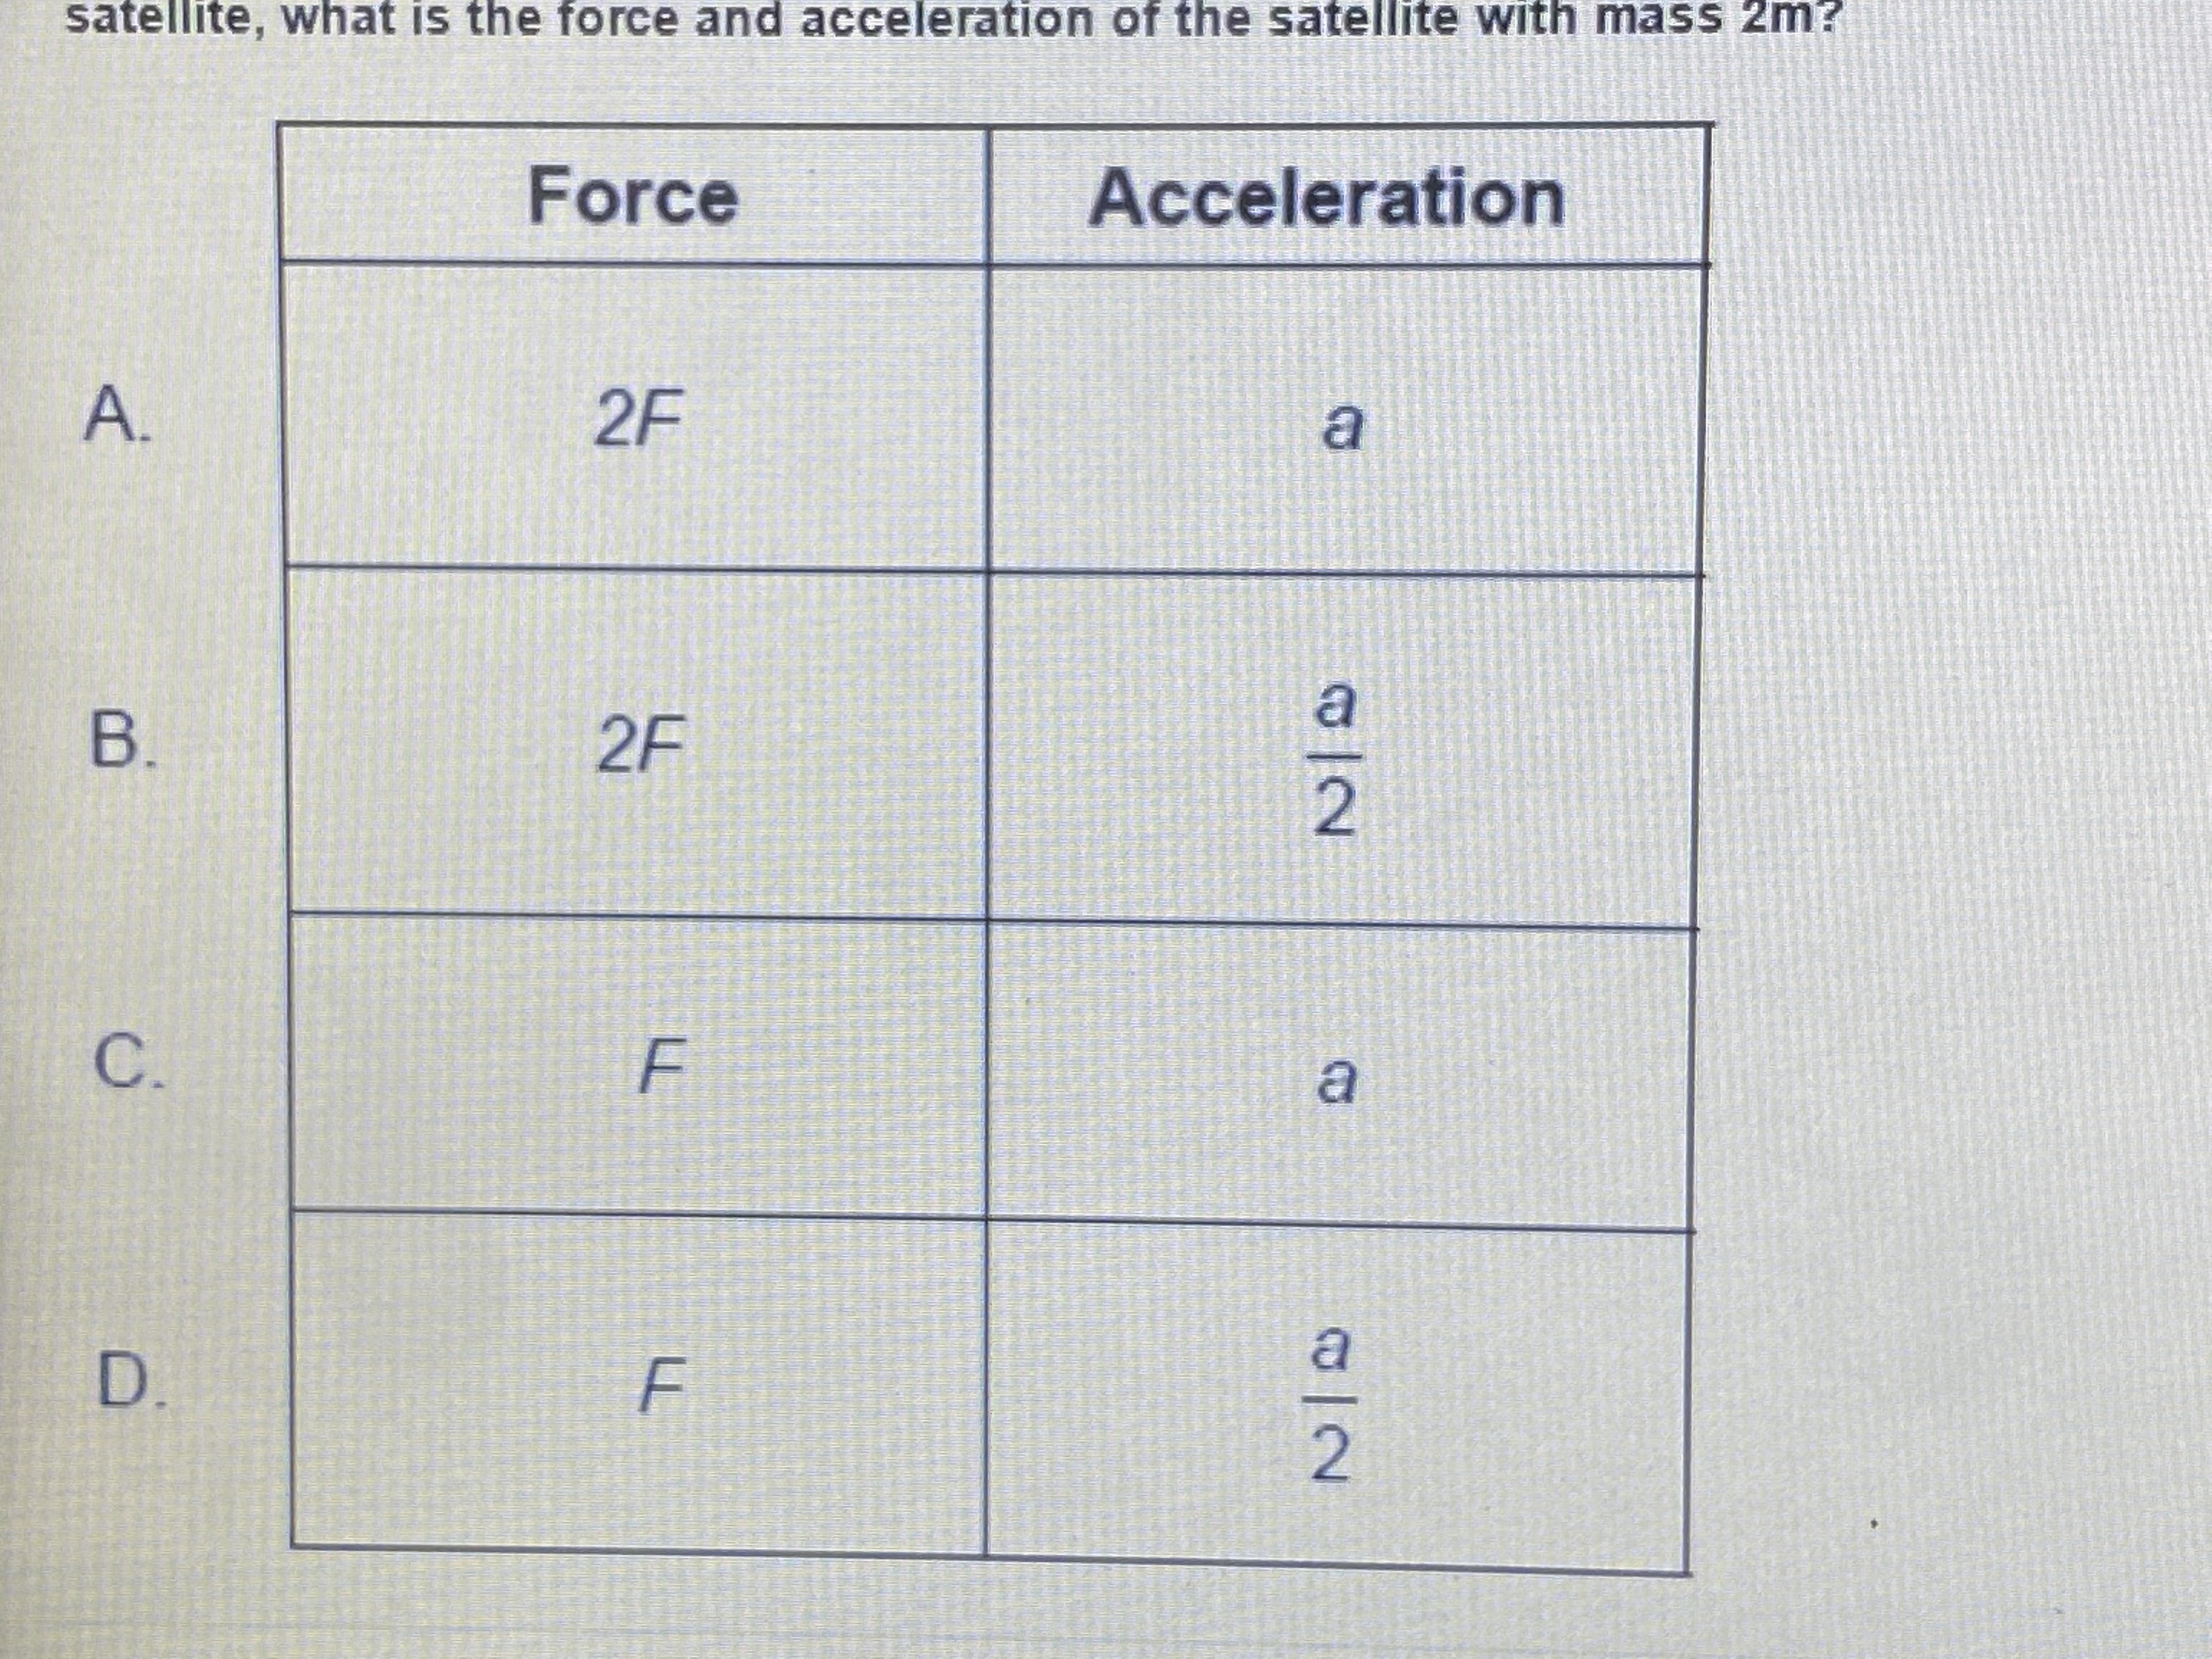 satellite, what is the force and acceleration of the satellite with mass 2m?
Force
Acceleration
A.
2F
B.
2F
2.
C.
D.
2.
LL
